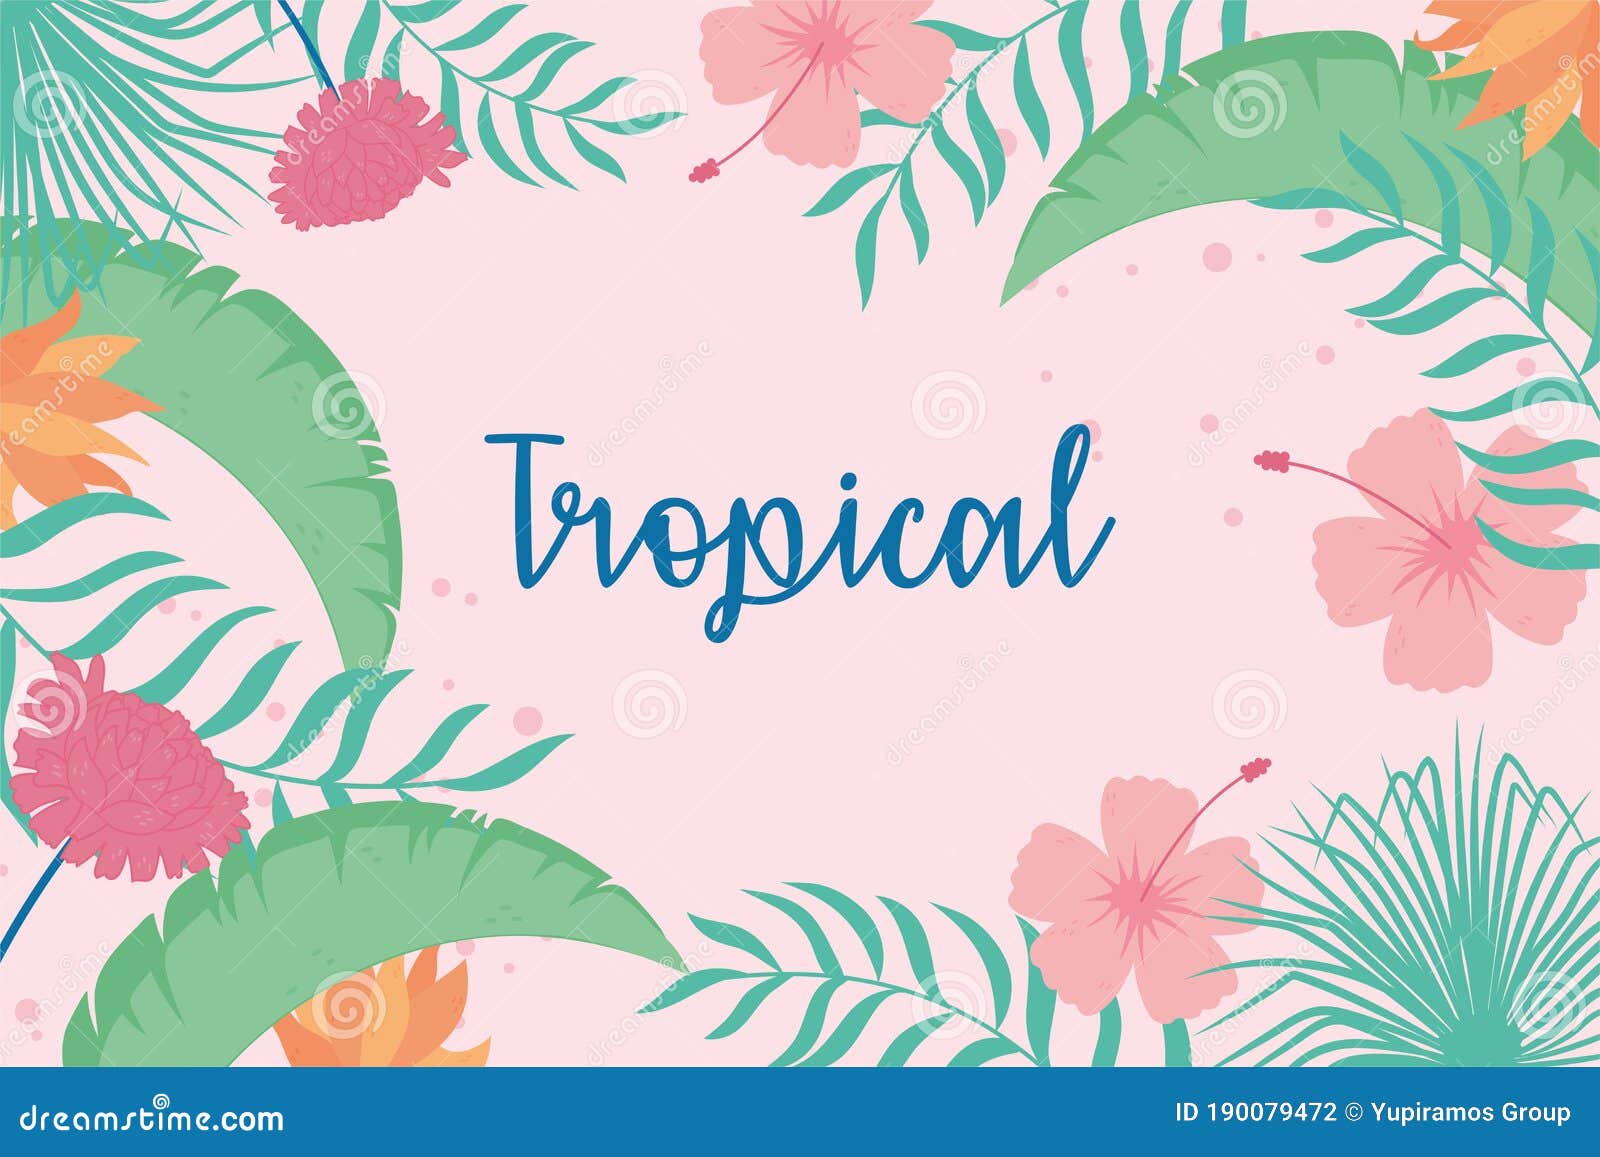 tropical leaves exotics flowers hibiscus palm leaf lettering